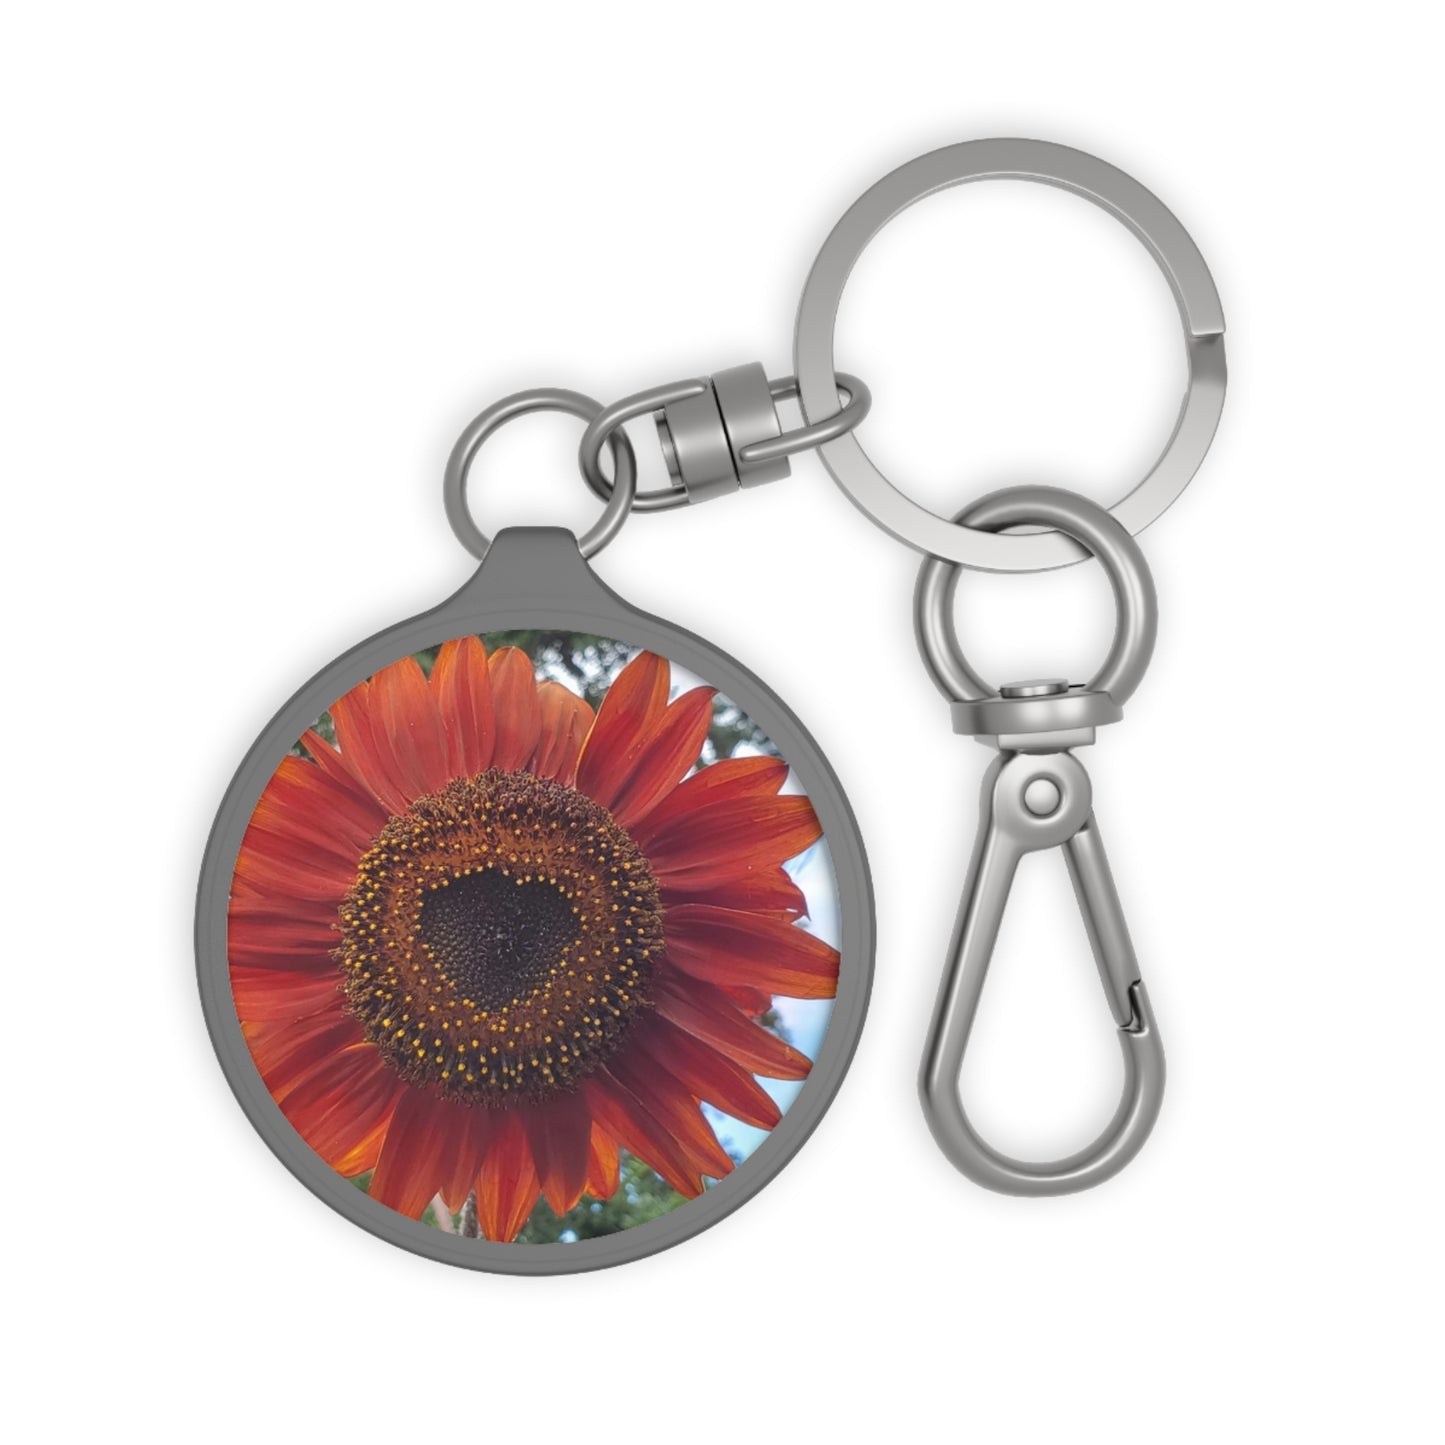 Heart Sunflower Key ring (Enchanted Exposures By Tammy Lyne)